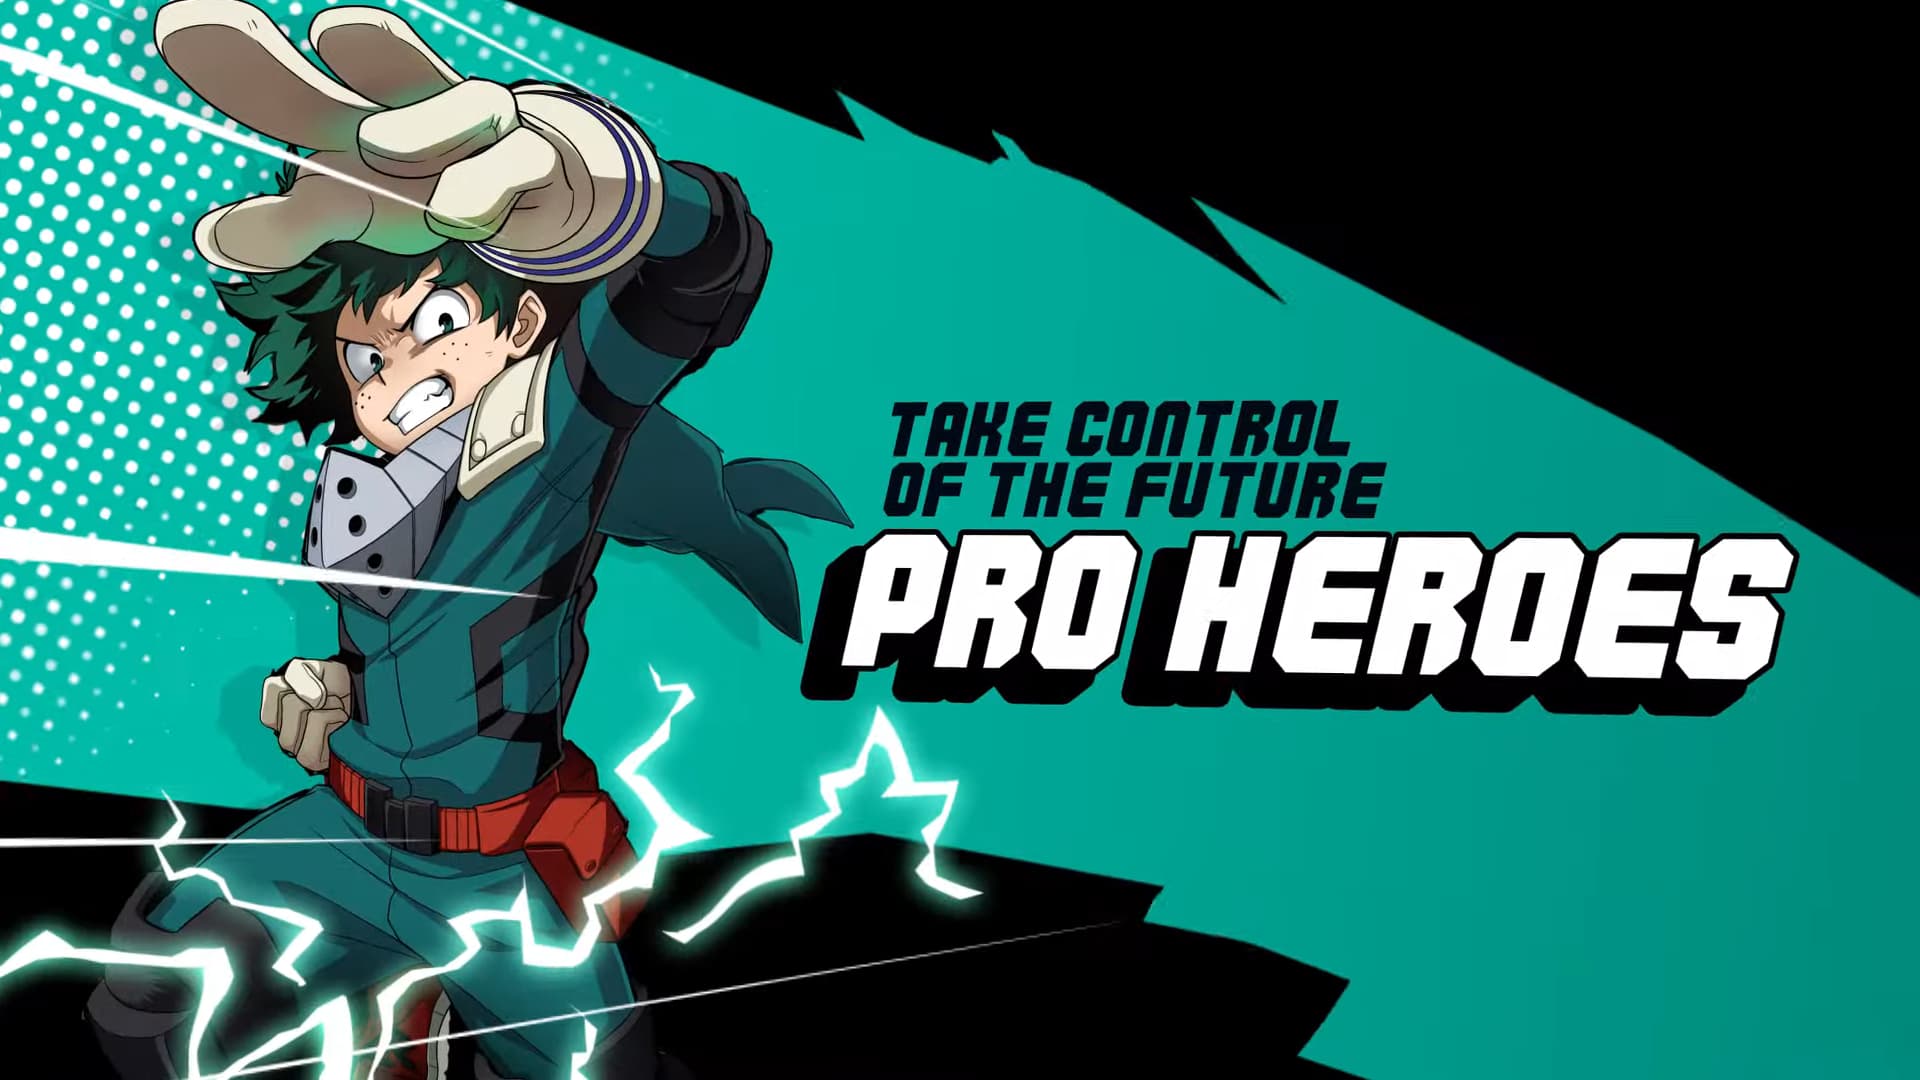 MHA:The Strongest Hero - Apps on Google Play